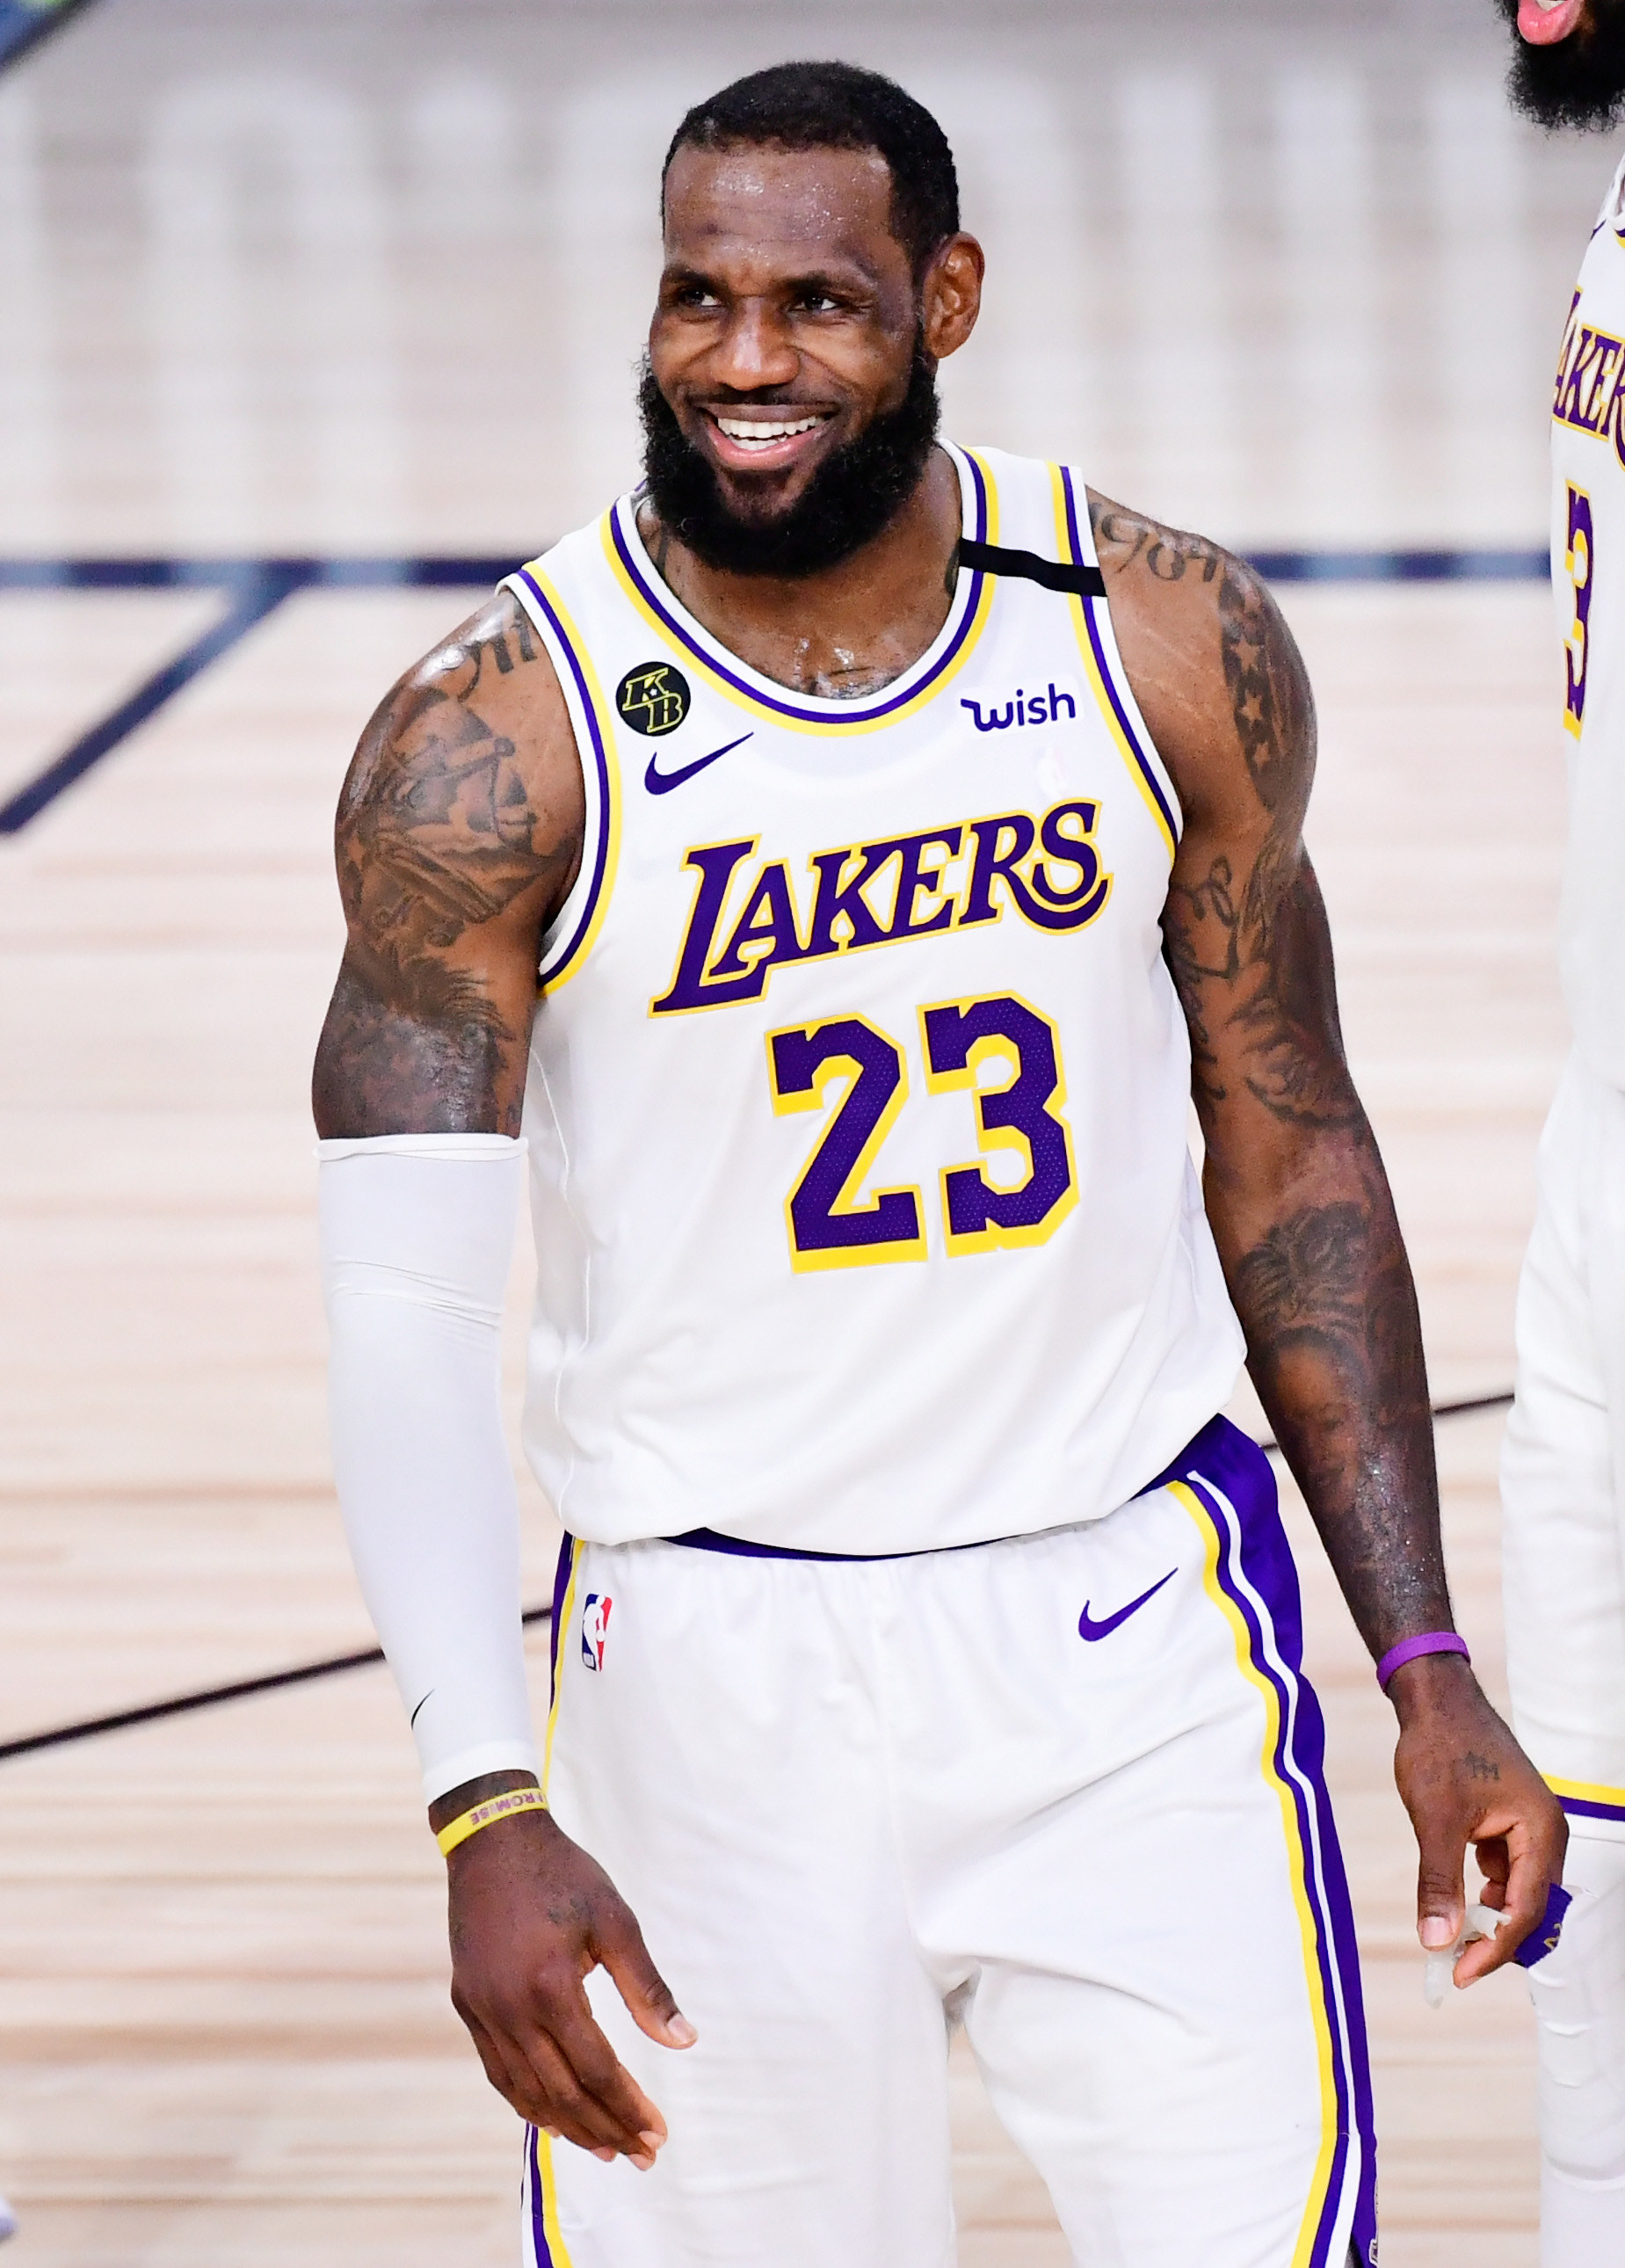 LA Lakers player LeBron smiling on the basketball court